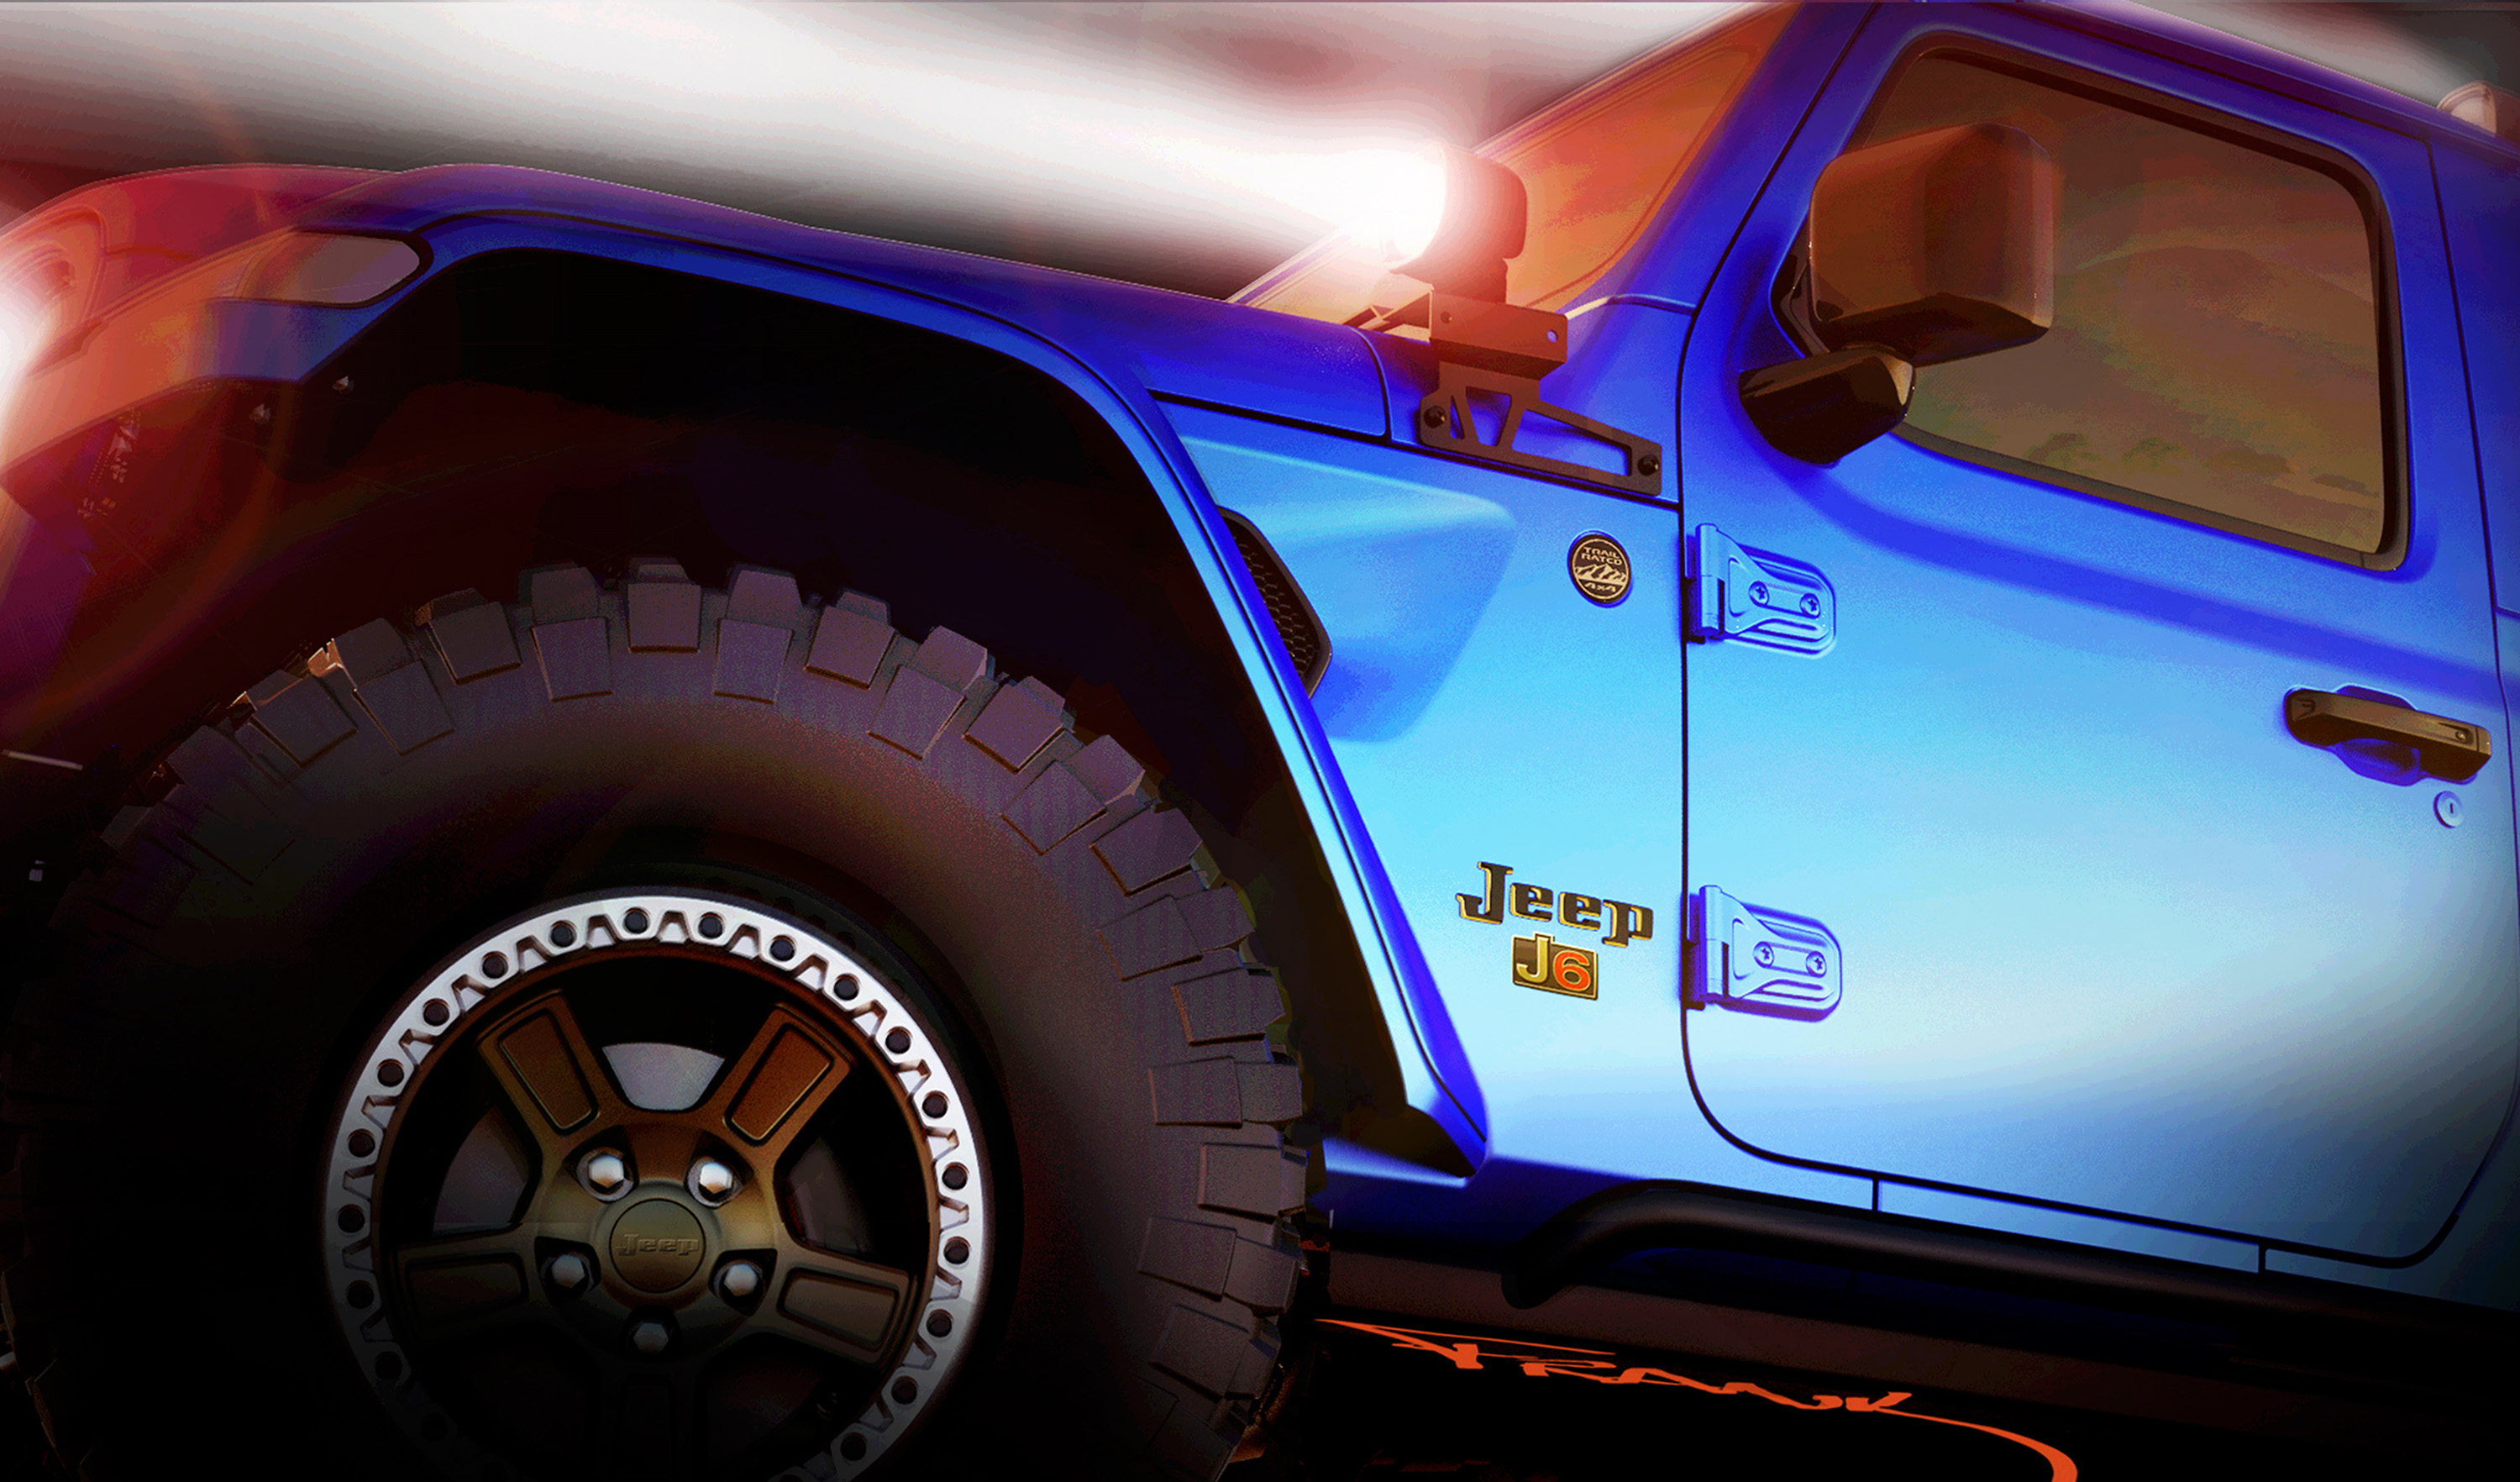 Moab EJS Vehicle Sneak Peek: The Jeep® and Mopar brands have created several concept vehicles for the annual Easter Jeep Safari. These images hint at two of the new concept vehicles that will head to Moab April 13-21.